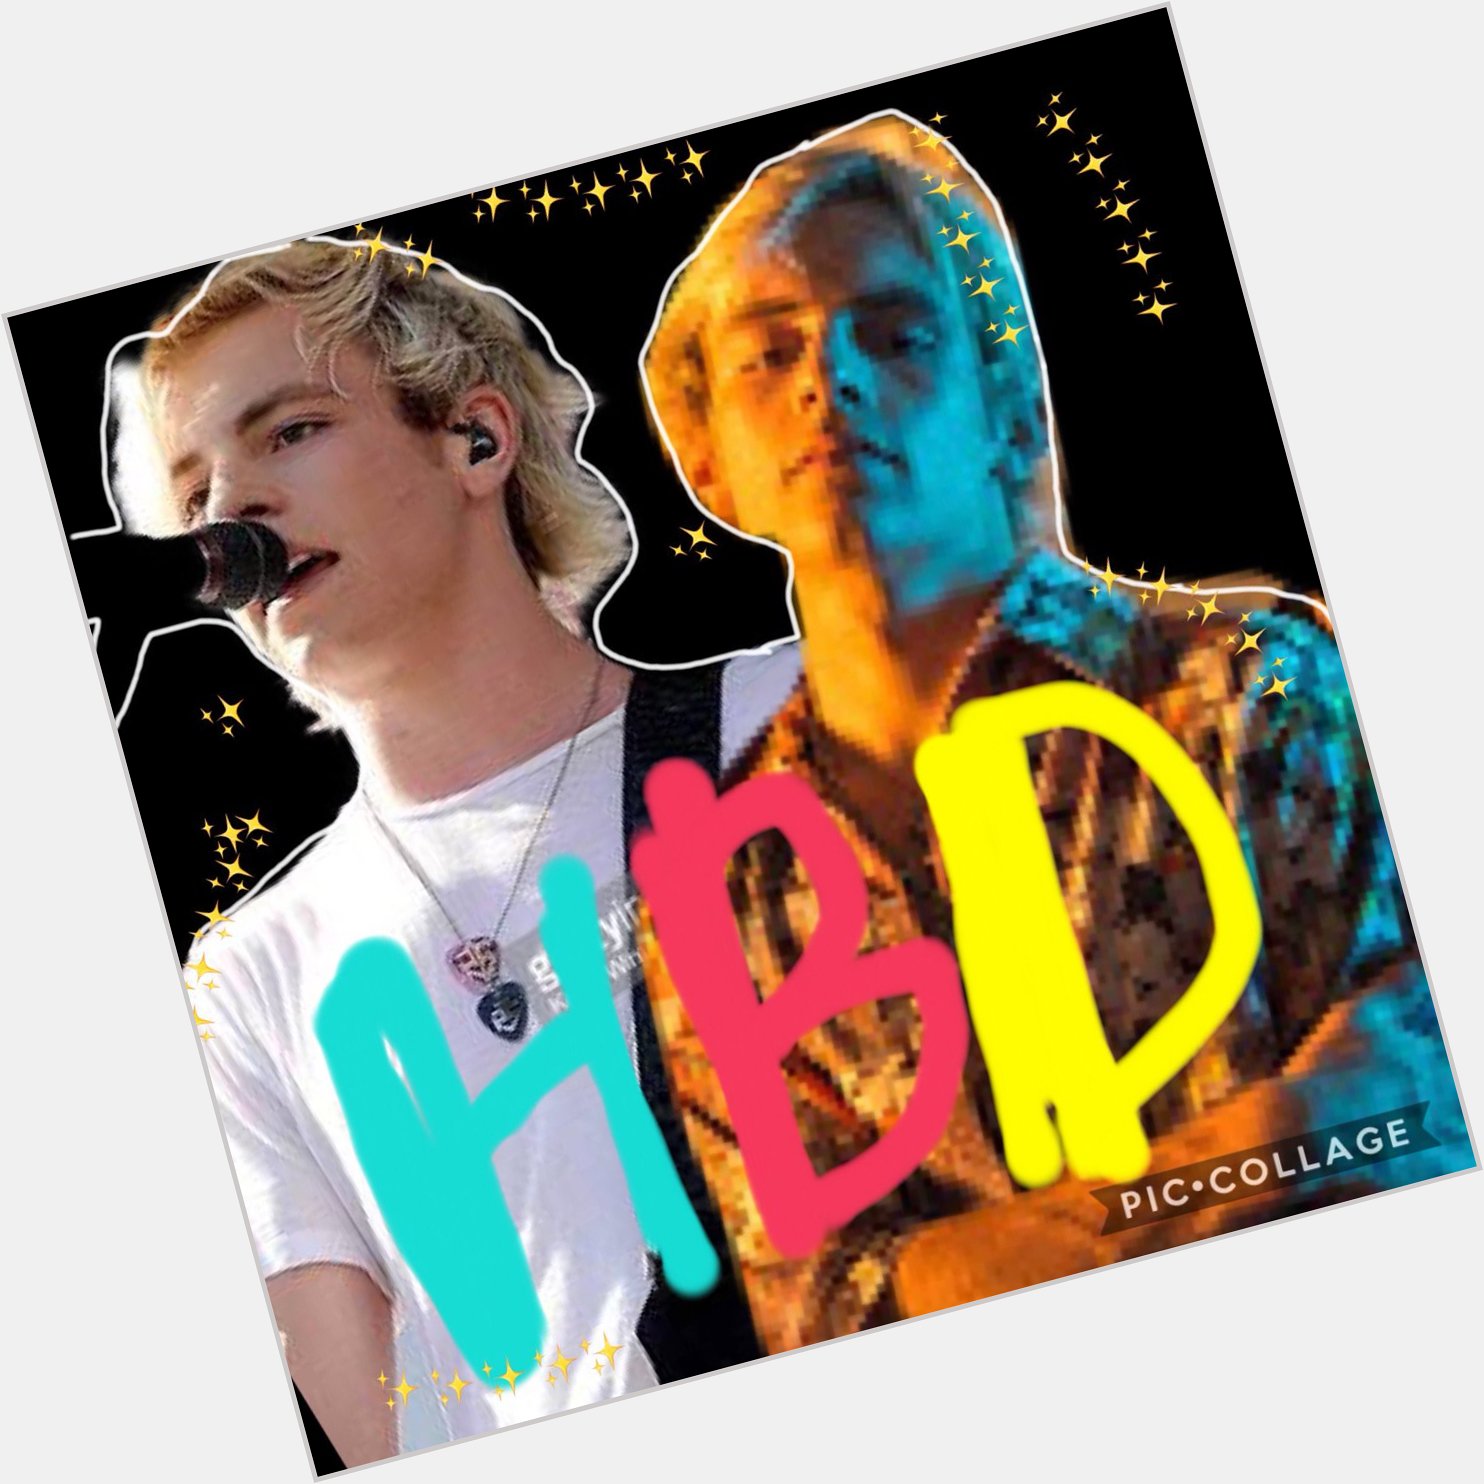 Happy Birthday  Ross Lynch I Love you:)
I m looking foreword to see u     